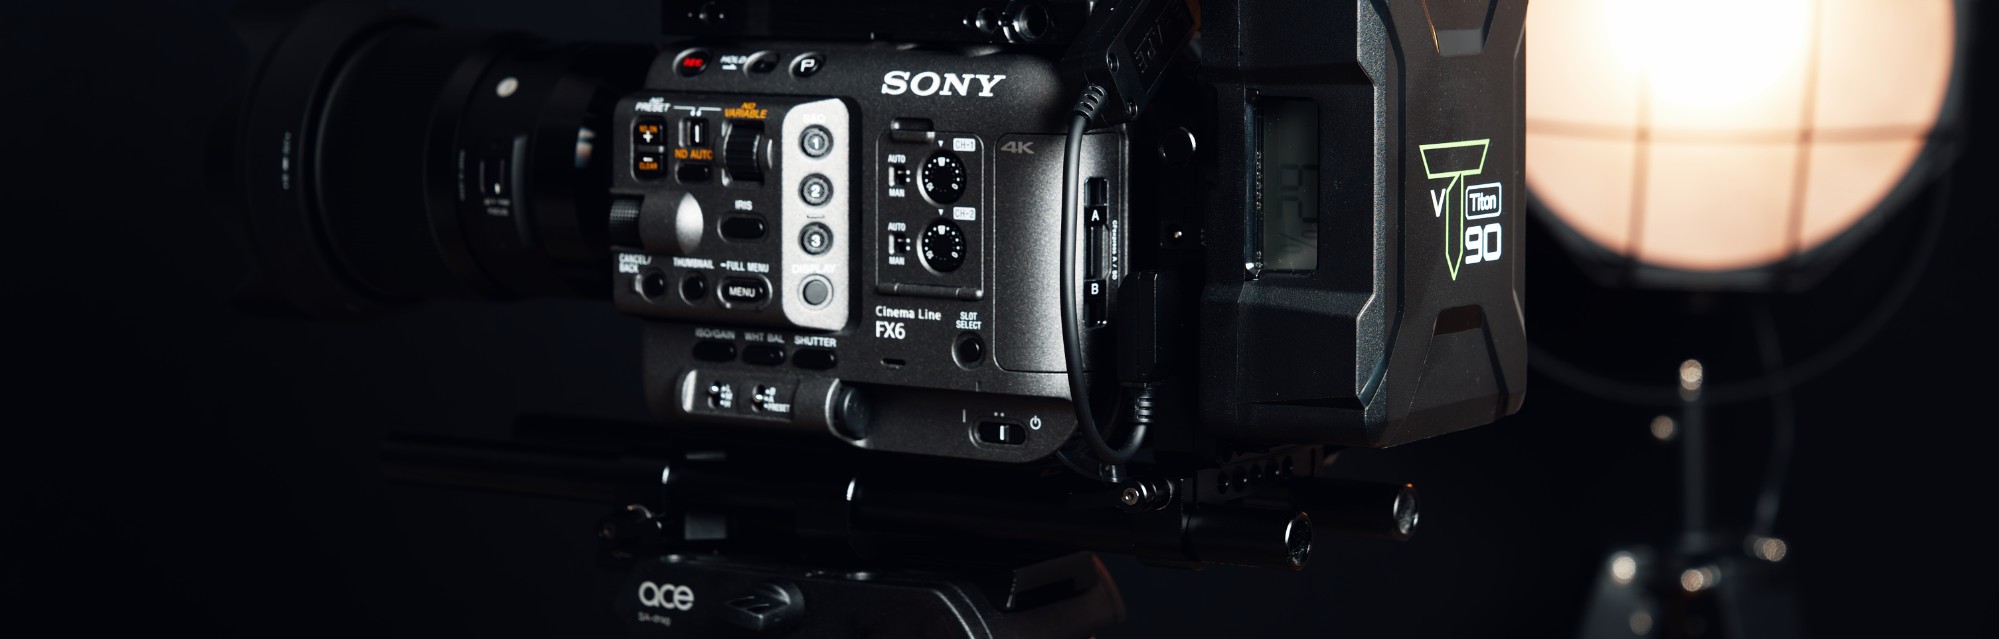 Sony FX6 Rig